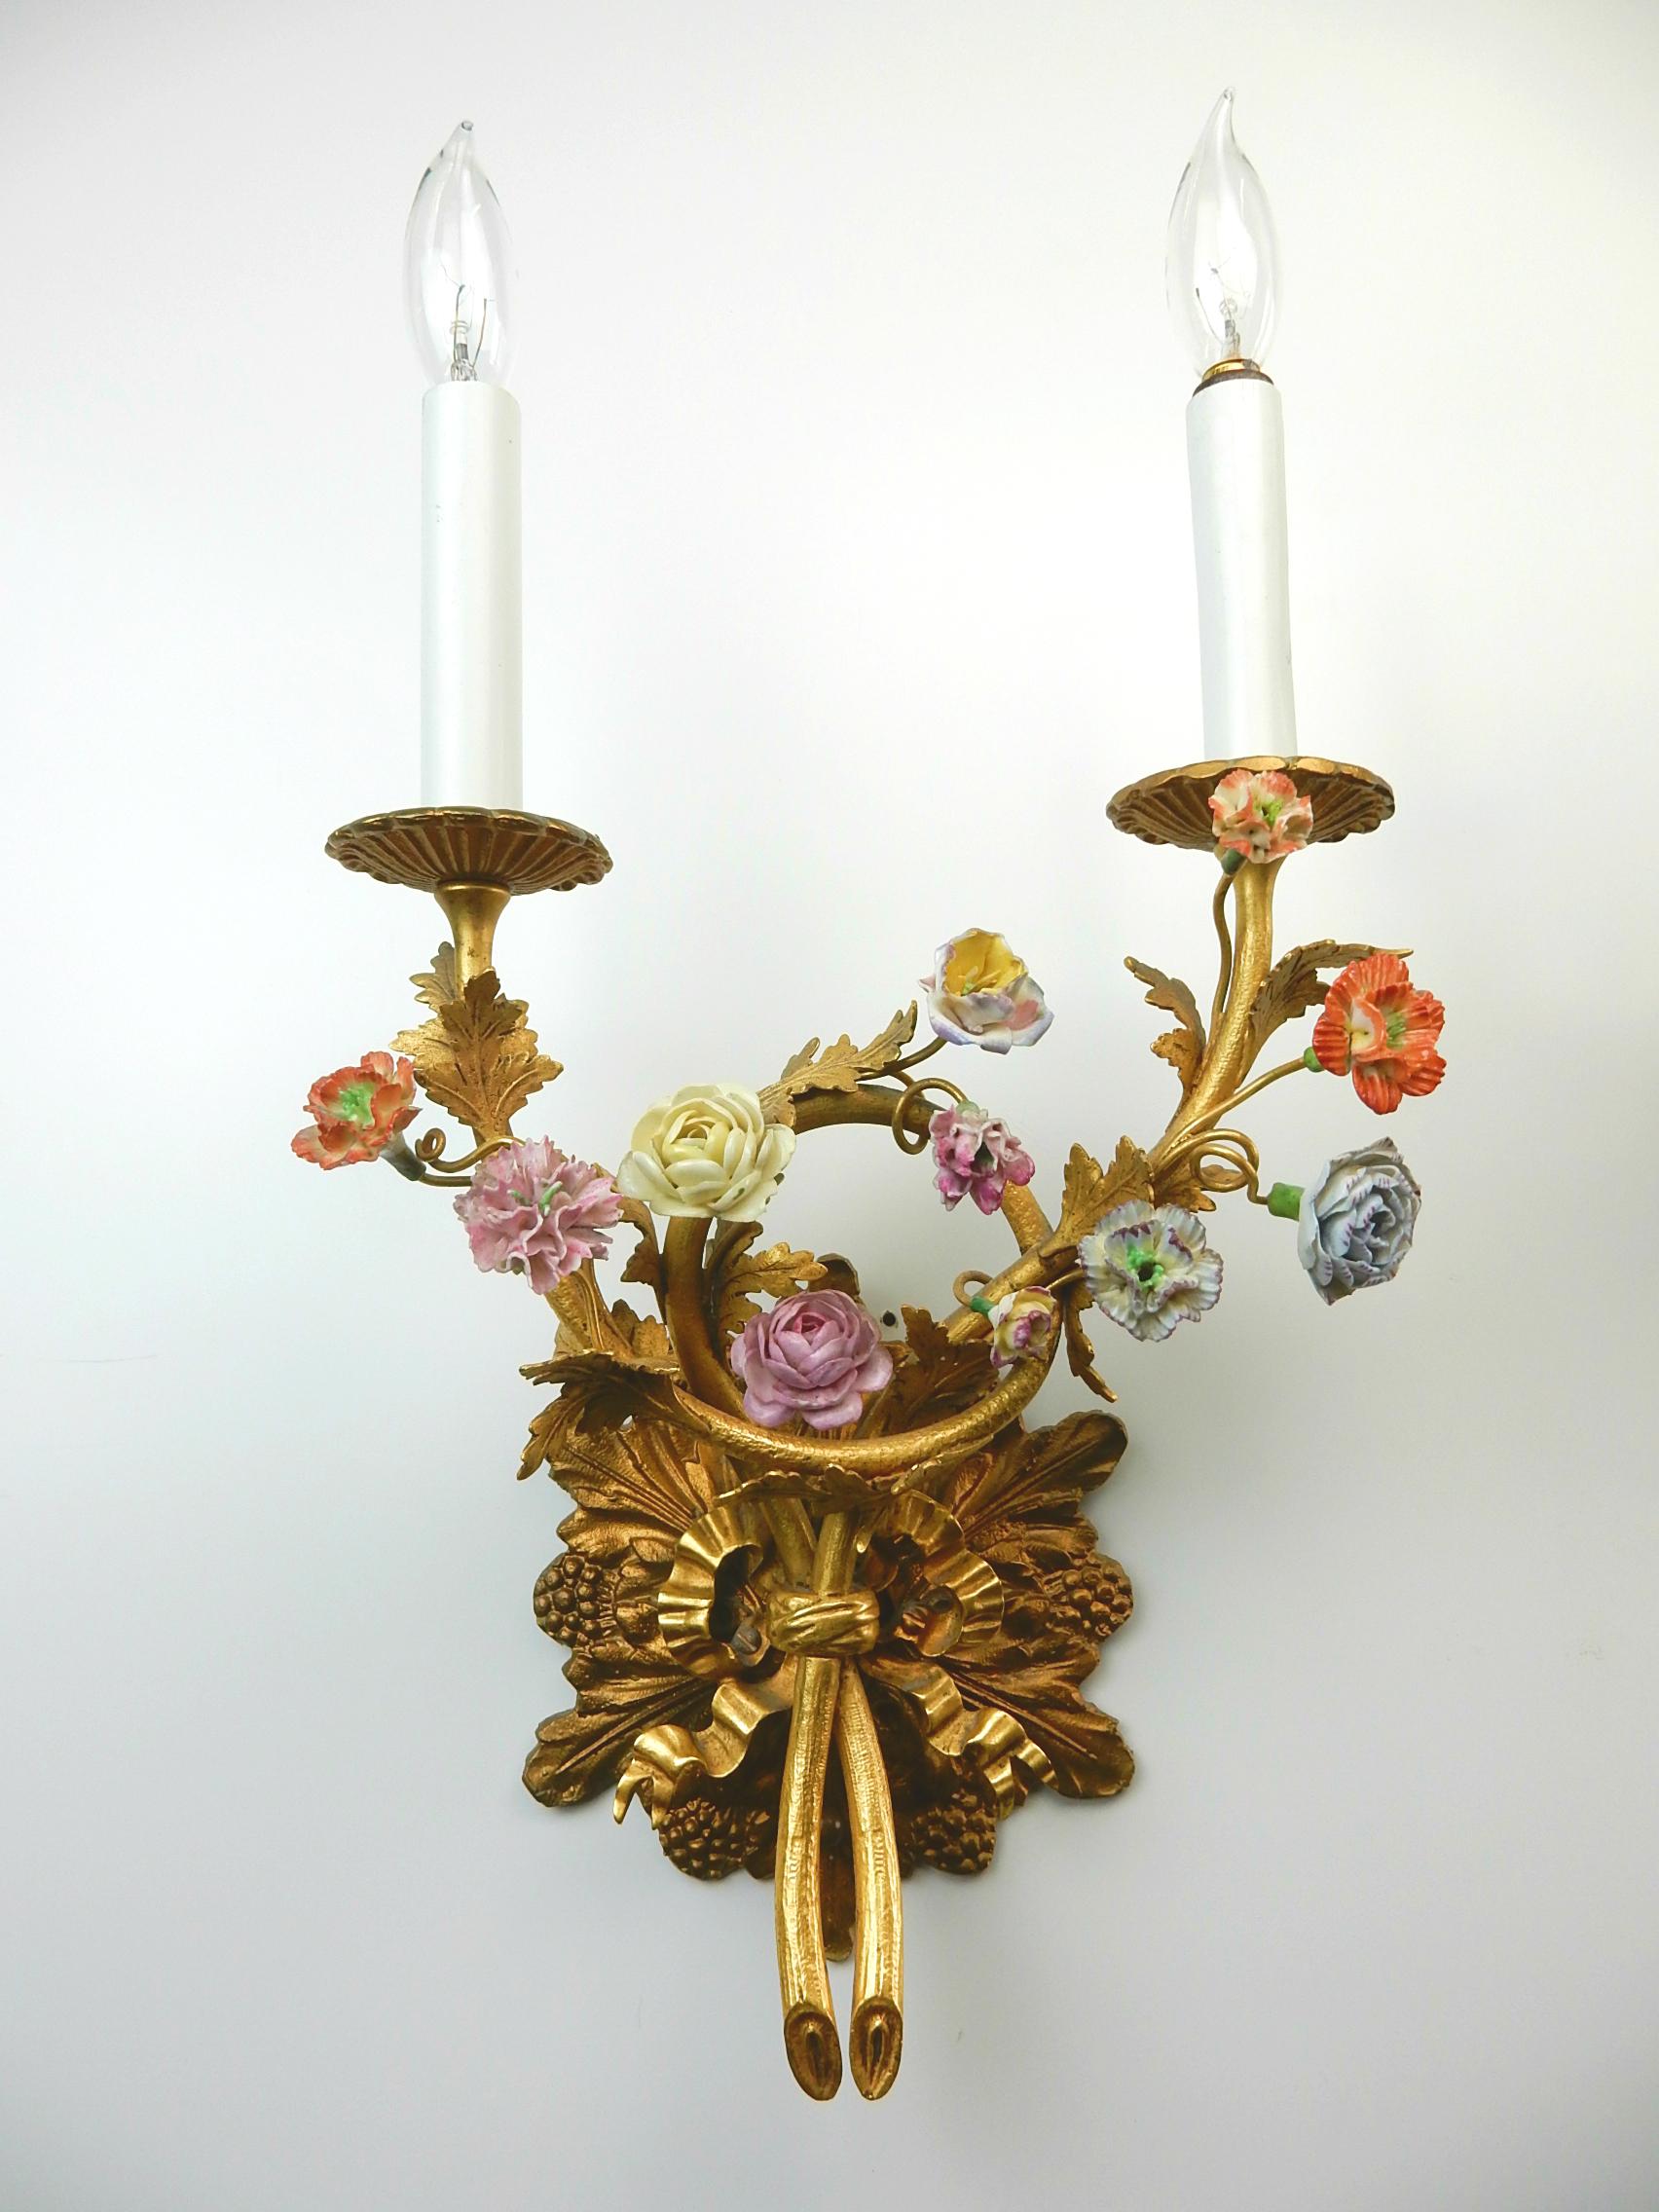 Fabulous pair of floral wall lamp sconces circa 1960s.
Gilded metal with organic floral design each tipped with a hand painted
porcelain flower.
These come with hardware to mount to any standard electrical box.